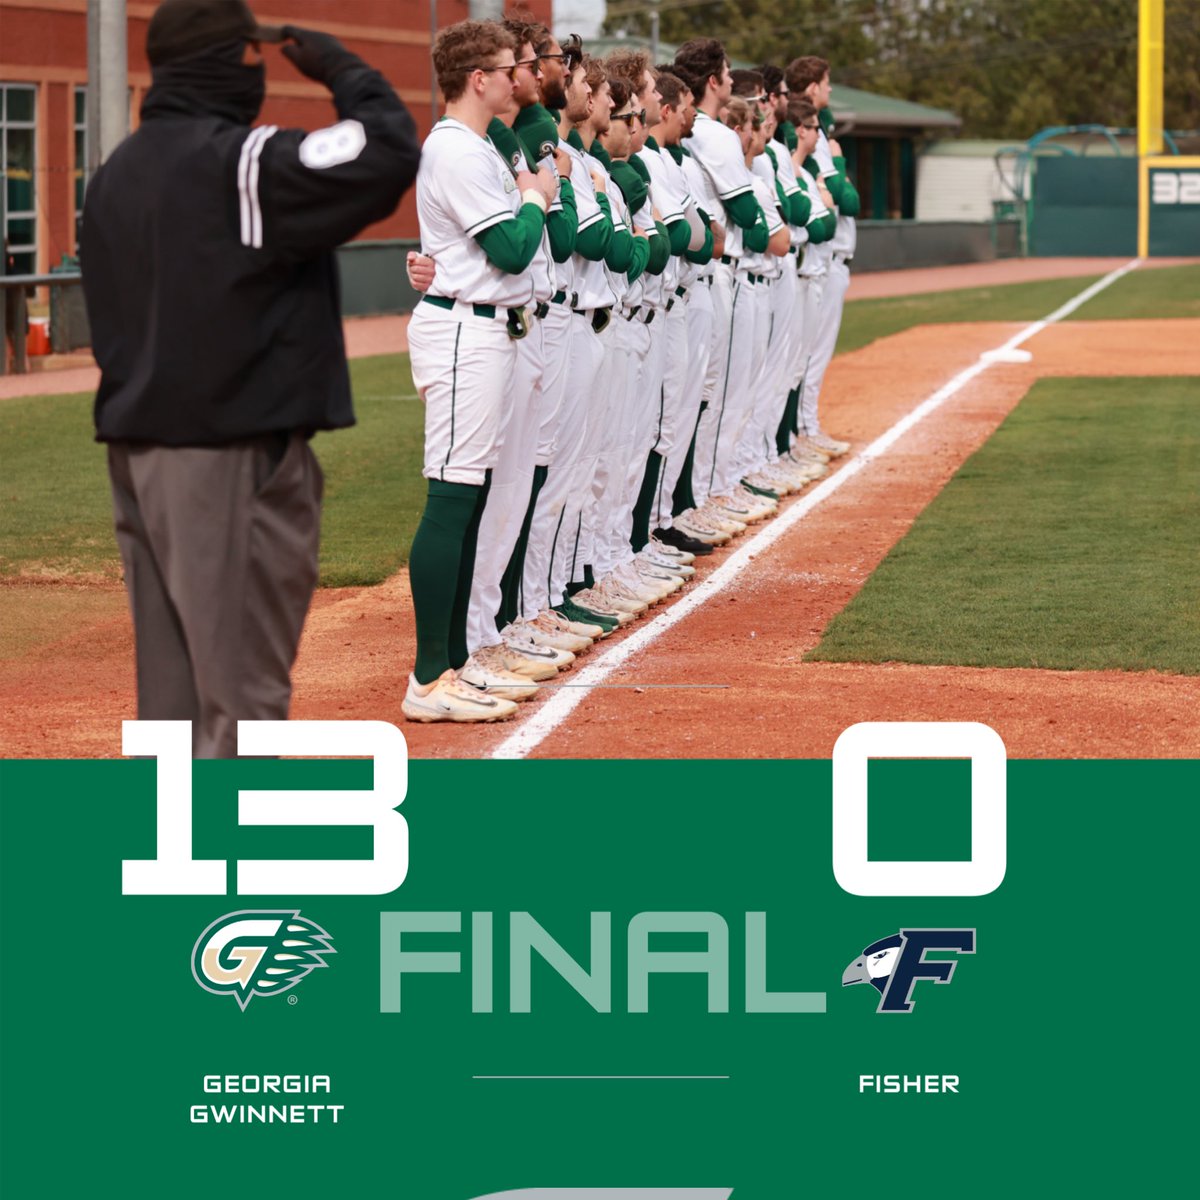 WINNING THE OPENER! Ajay Sczepkowski hits a pair of home runs as the Grizzlies send four balls over the outfield wall to win Saturday’s opener. Kaleb Hill took a no-hitter into the sixth inning. #GGCAthletics | #GrizGangGGC